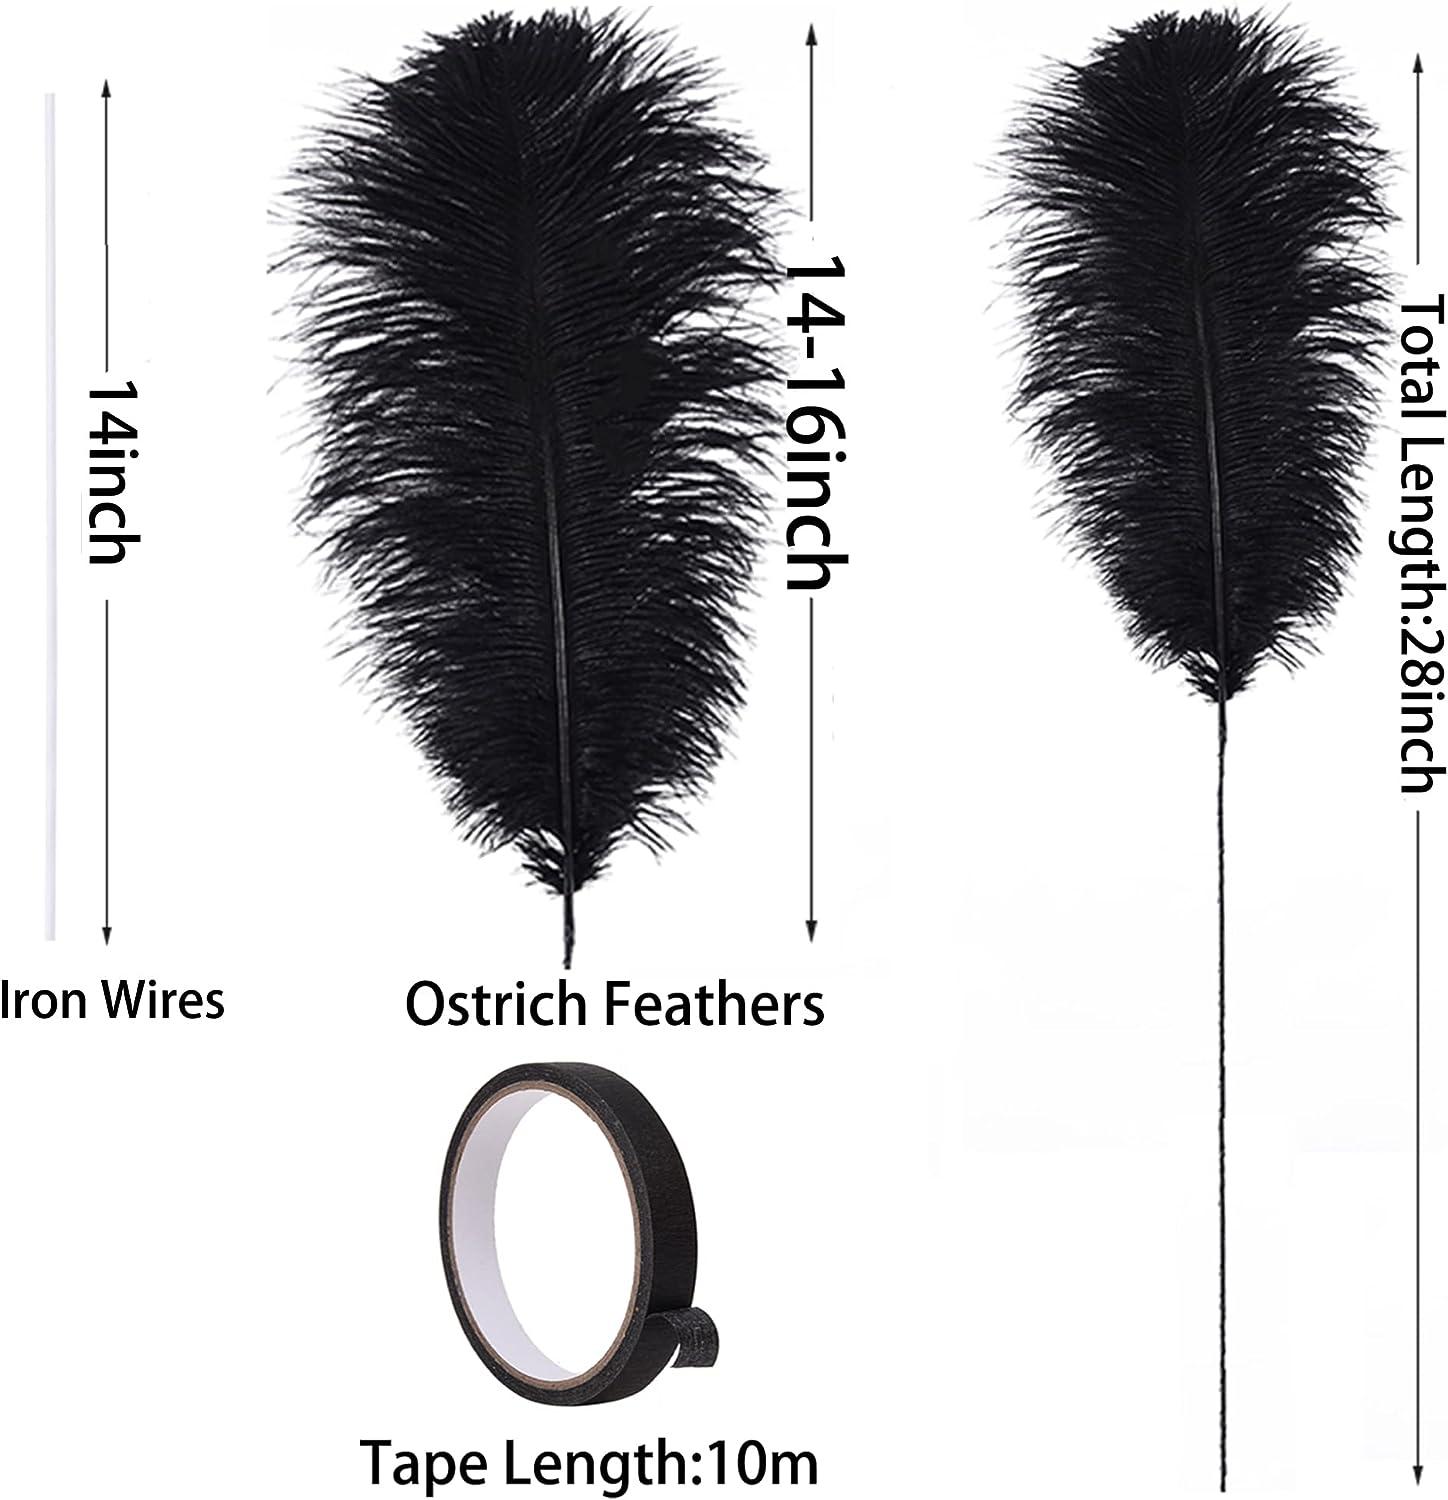 EVNNO 10 Pcs Natural Black Ostrich Feathers Making Kit,27-29 in Large  Ostrich Feathers Bulk for Wedd…See more EVNNO 10 Pcs Natural Black Ostrich